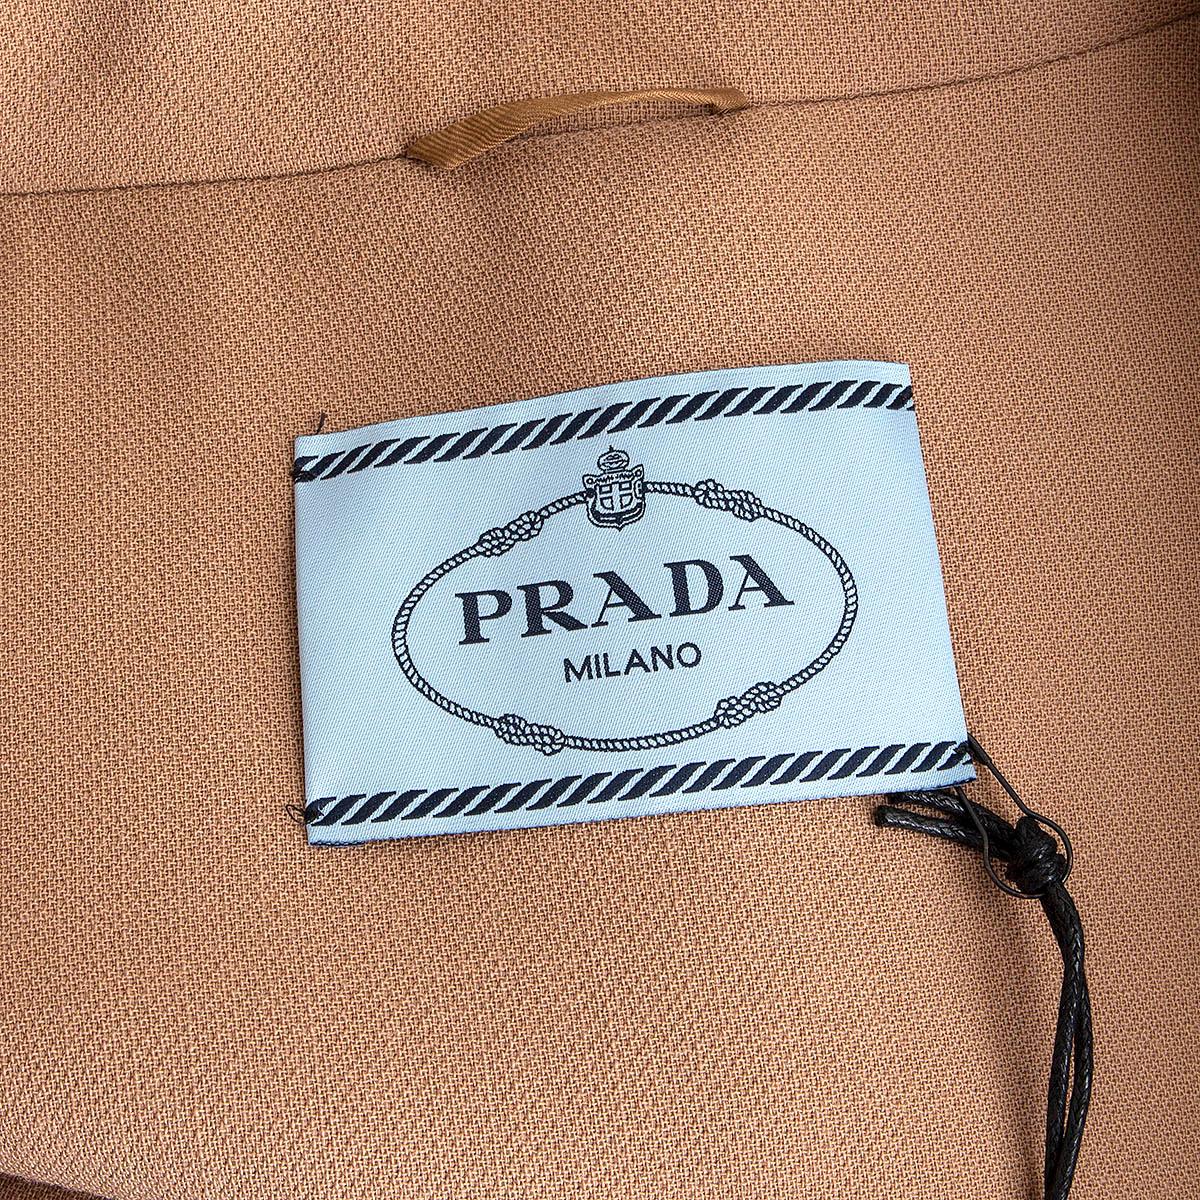 PRADA camel brown wool SLEEVELESS Coat Jacket 44 L In Excellent Condition For Sale In Zürich, CH